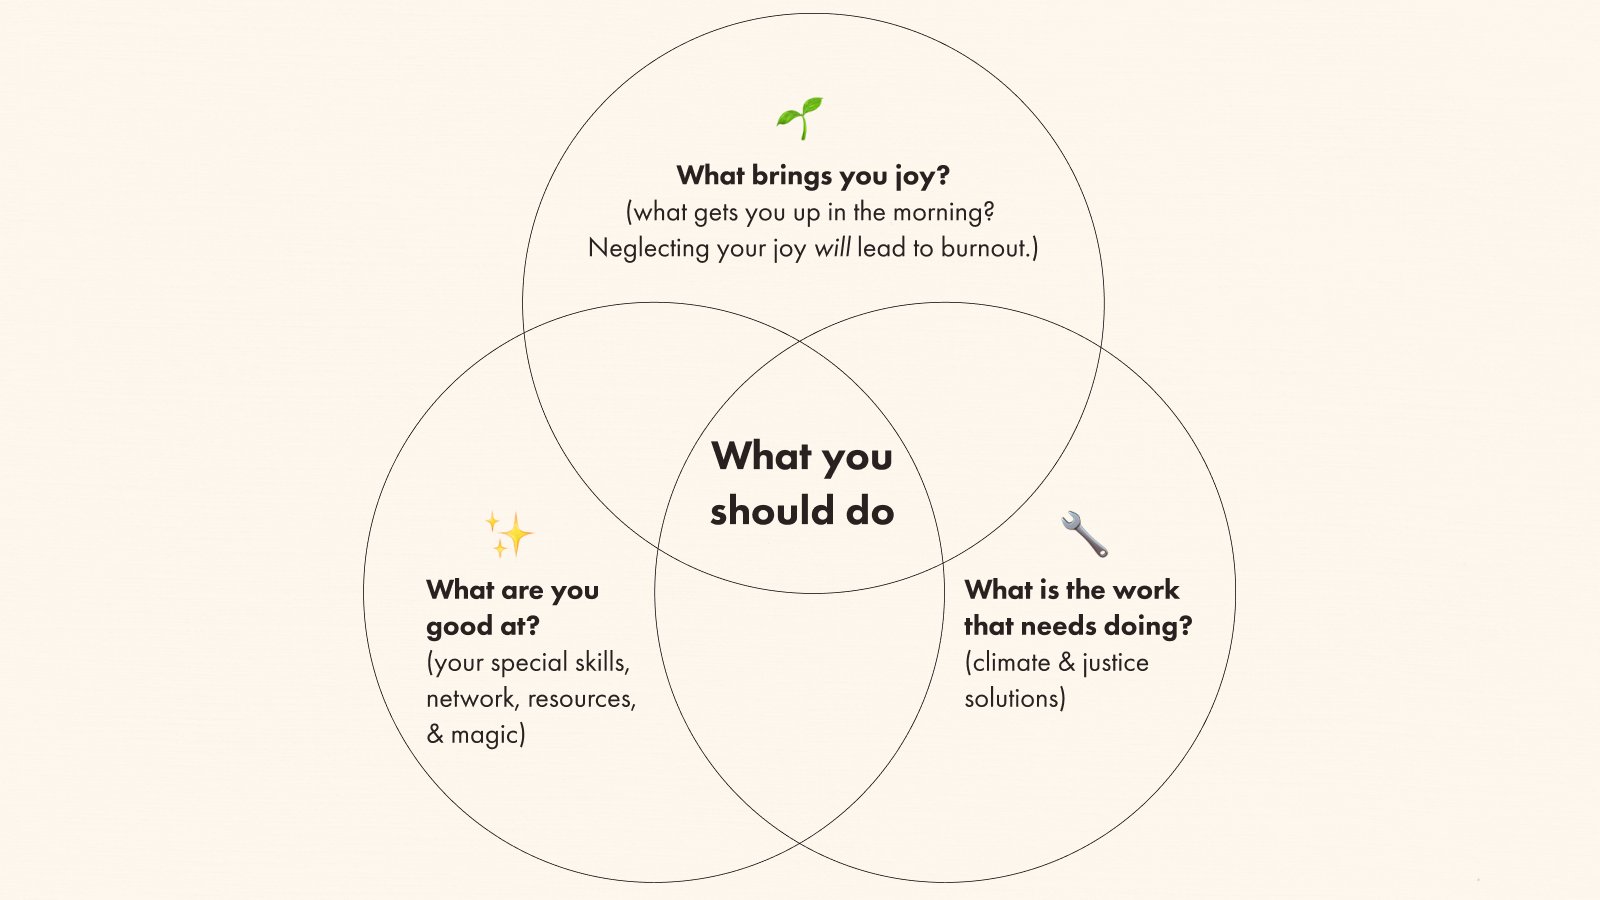 Venn diagram: "What brings you joy?" / "What is the work that needs doing?" / "What are you good at?" (in the centre is "What you should do")